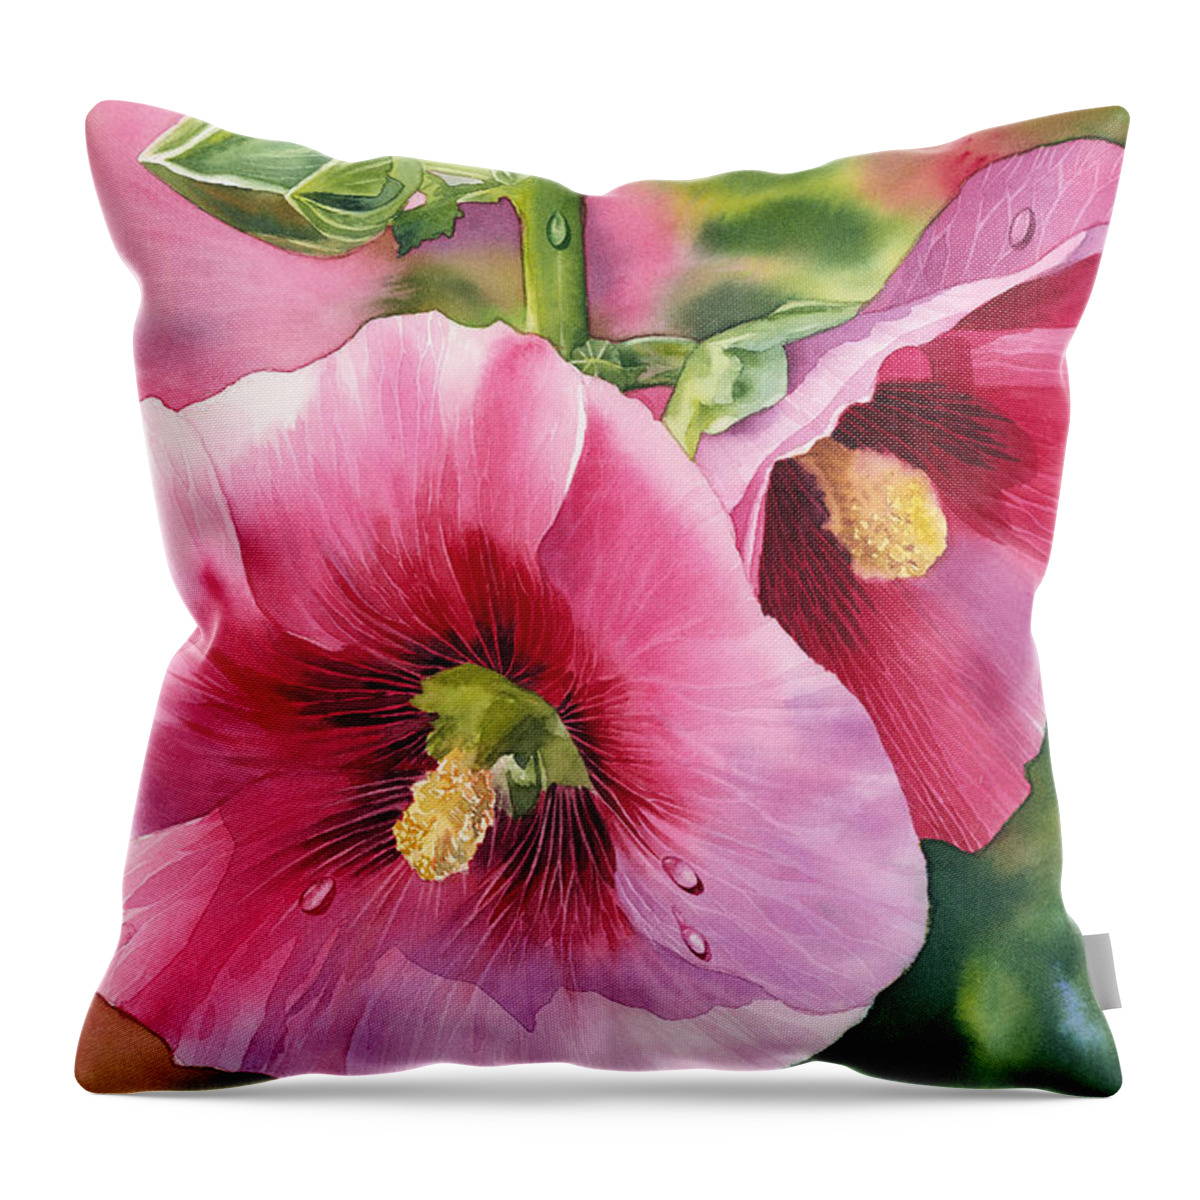 Hollyhock Throw Pillow featuring the painting Hollyhock by Espero Art